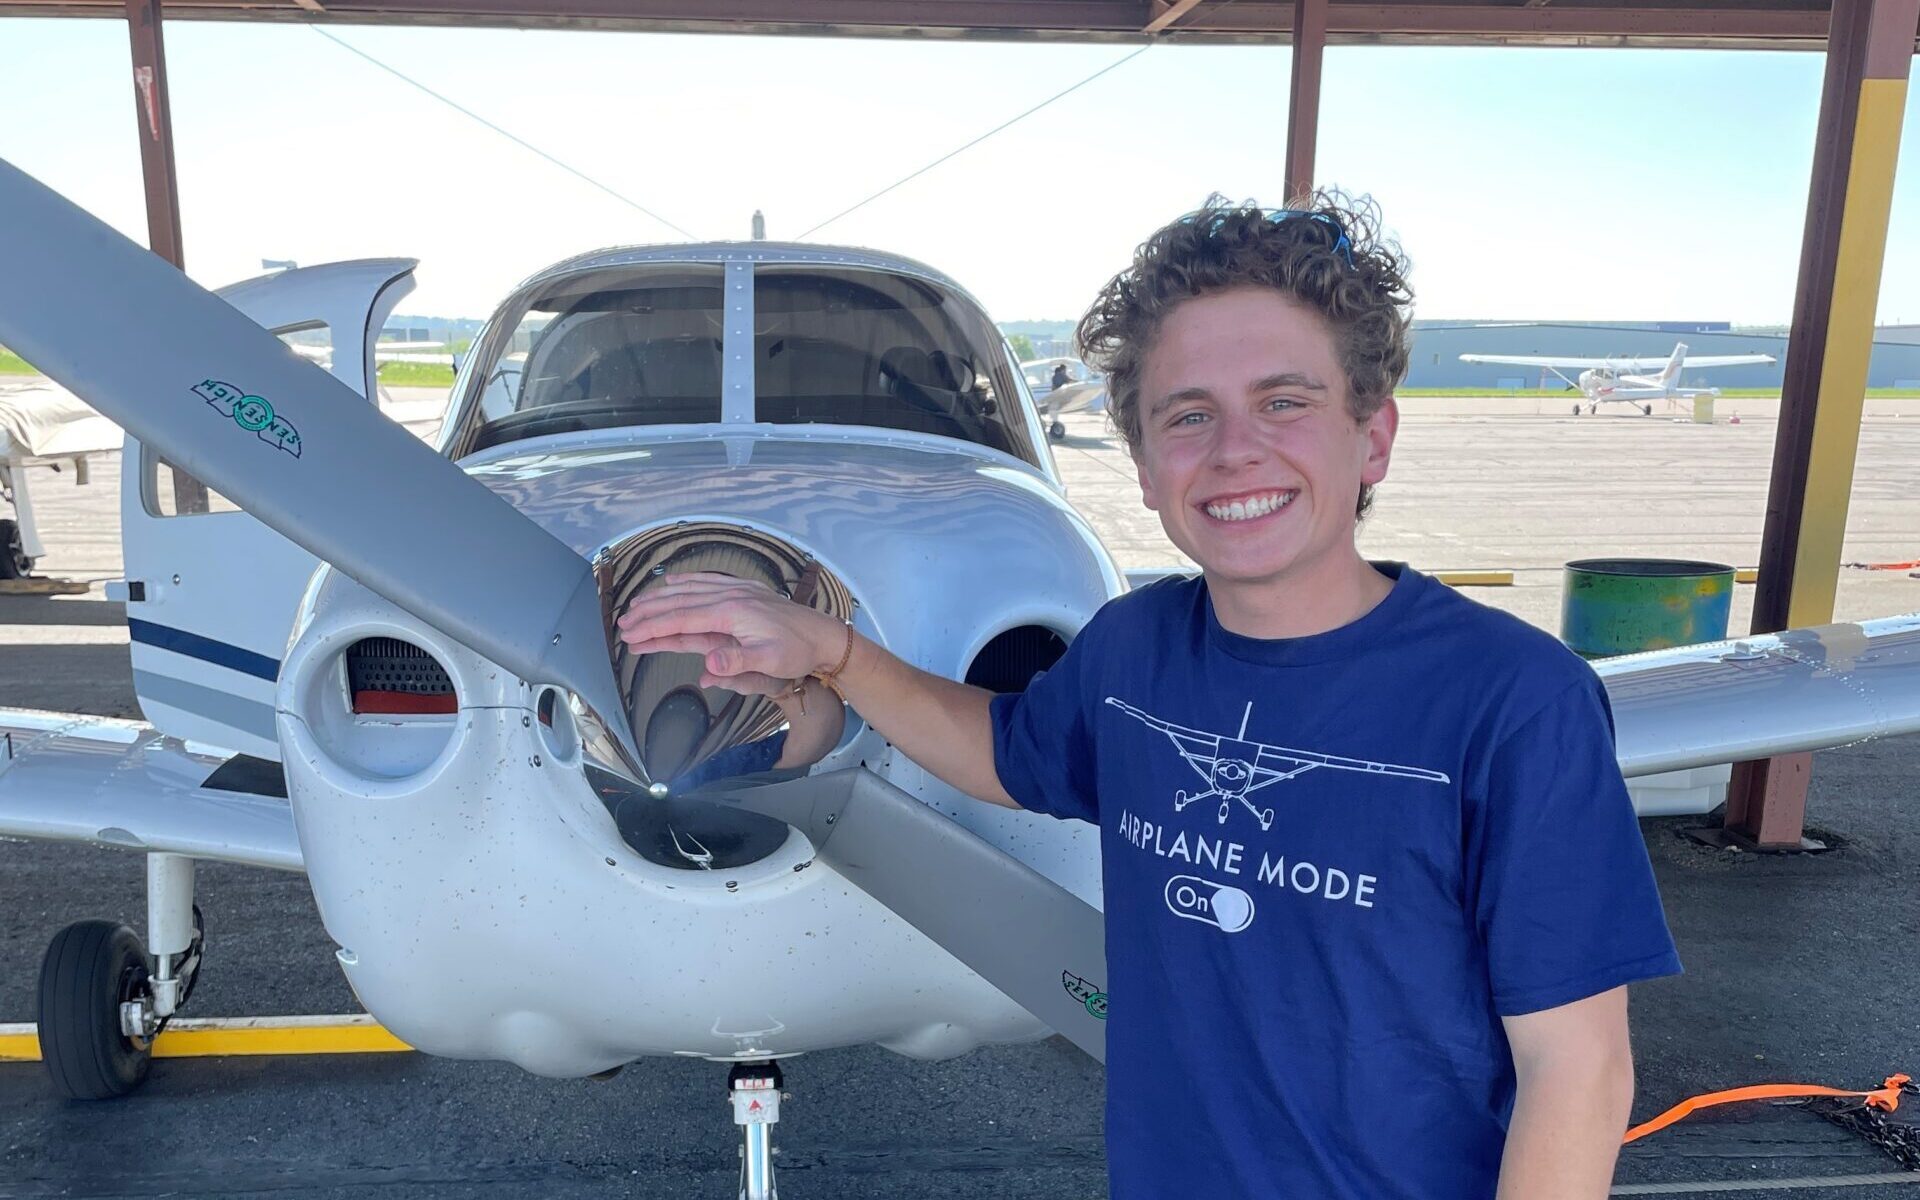 Myles Rubin during his flight training to receive his private pilot's license.